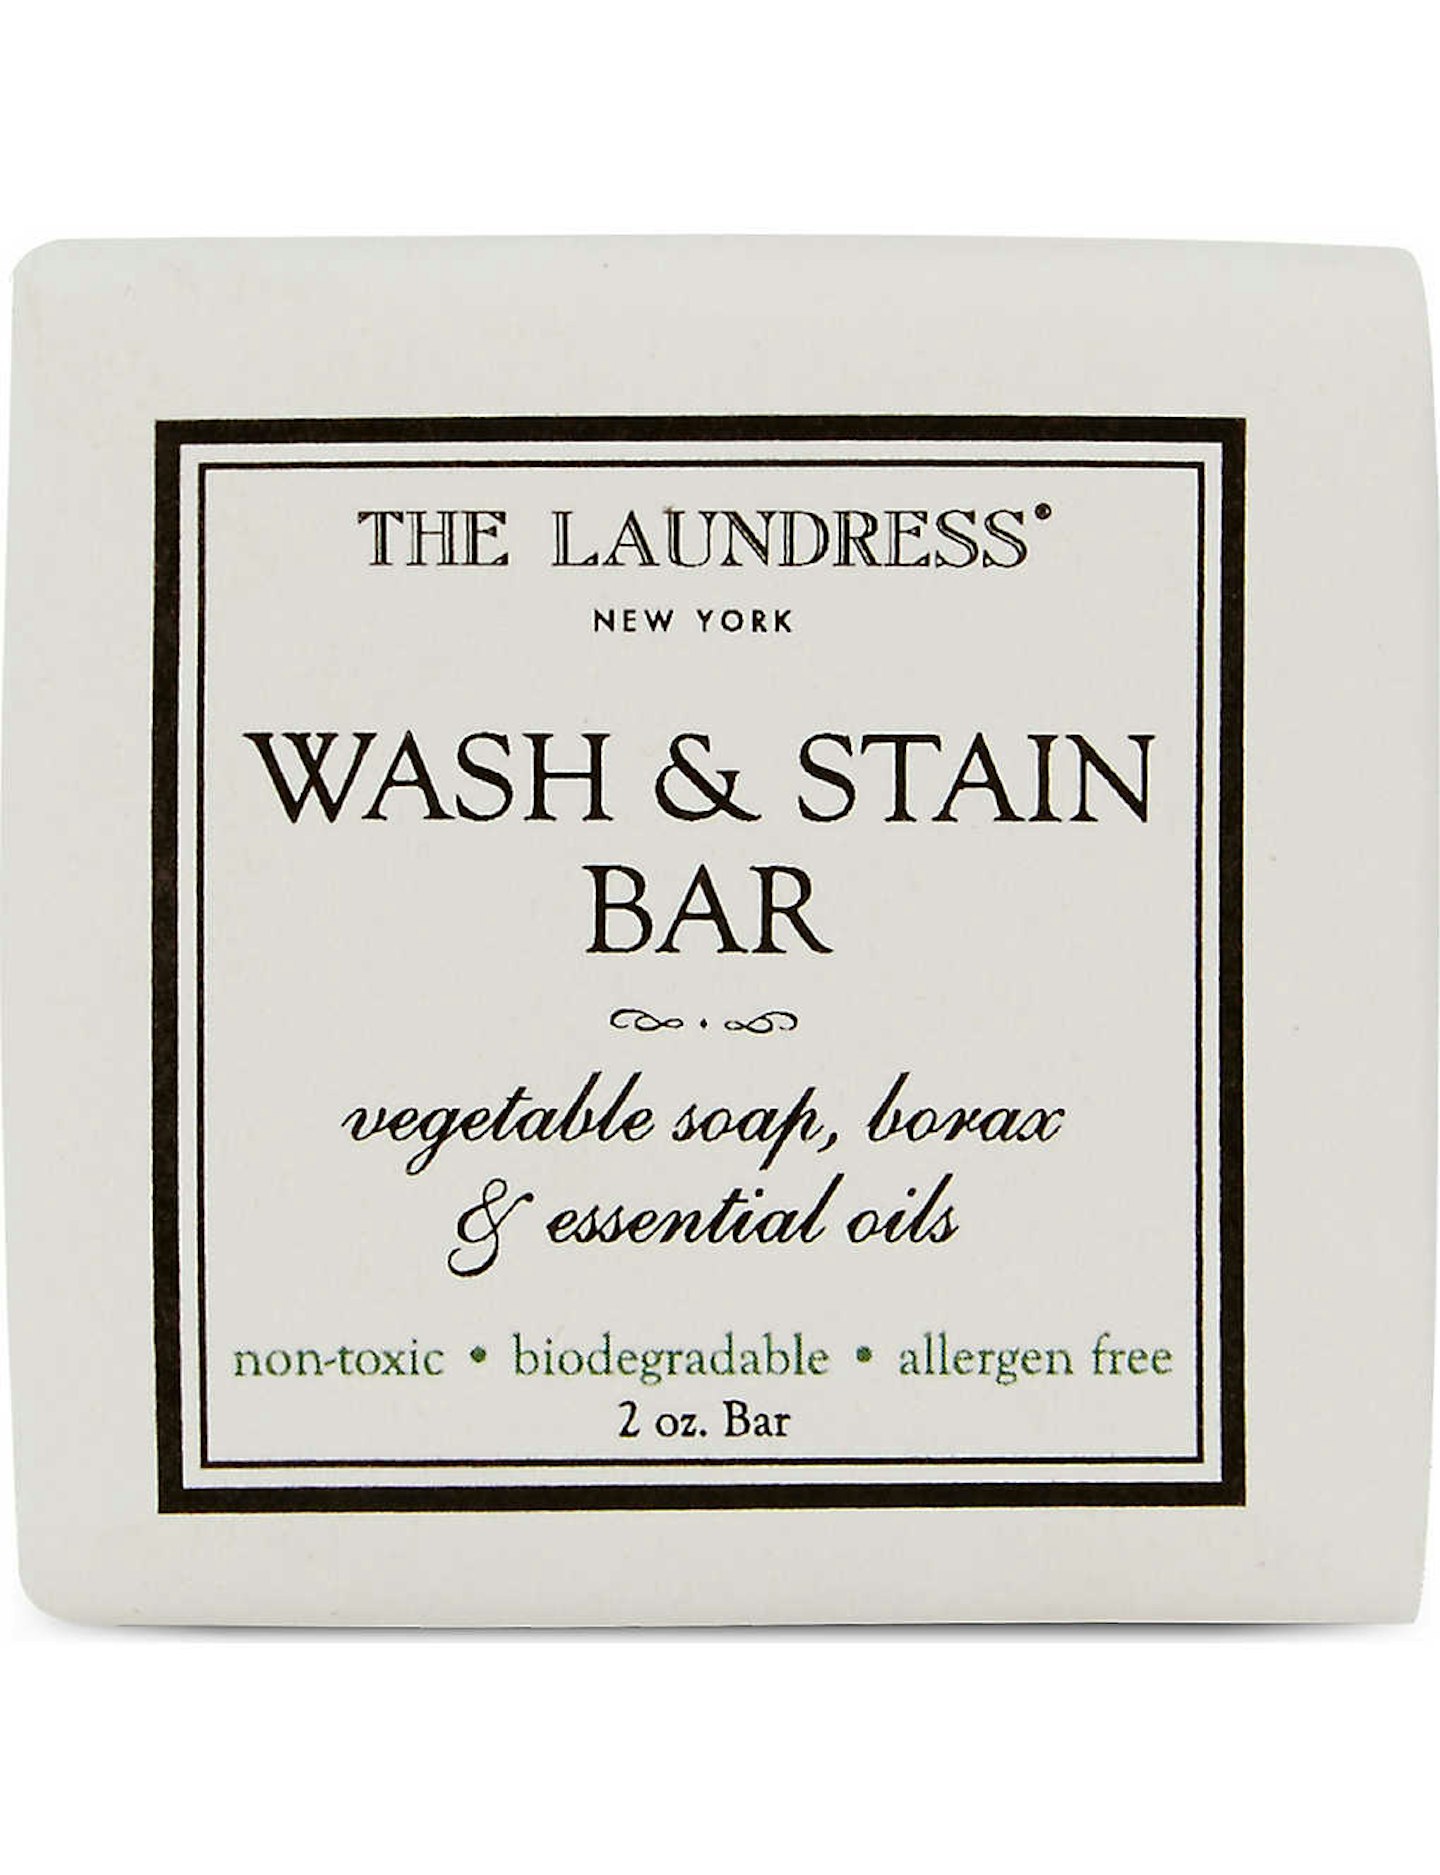 The Laundress, Wash & stain bar, £5.95